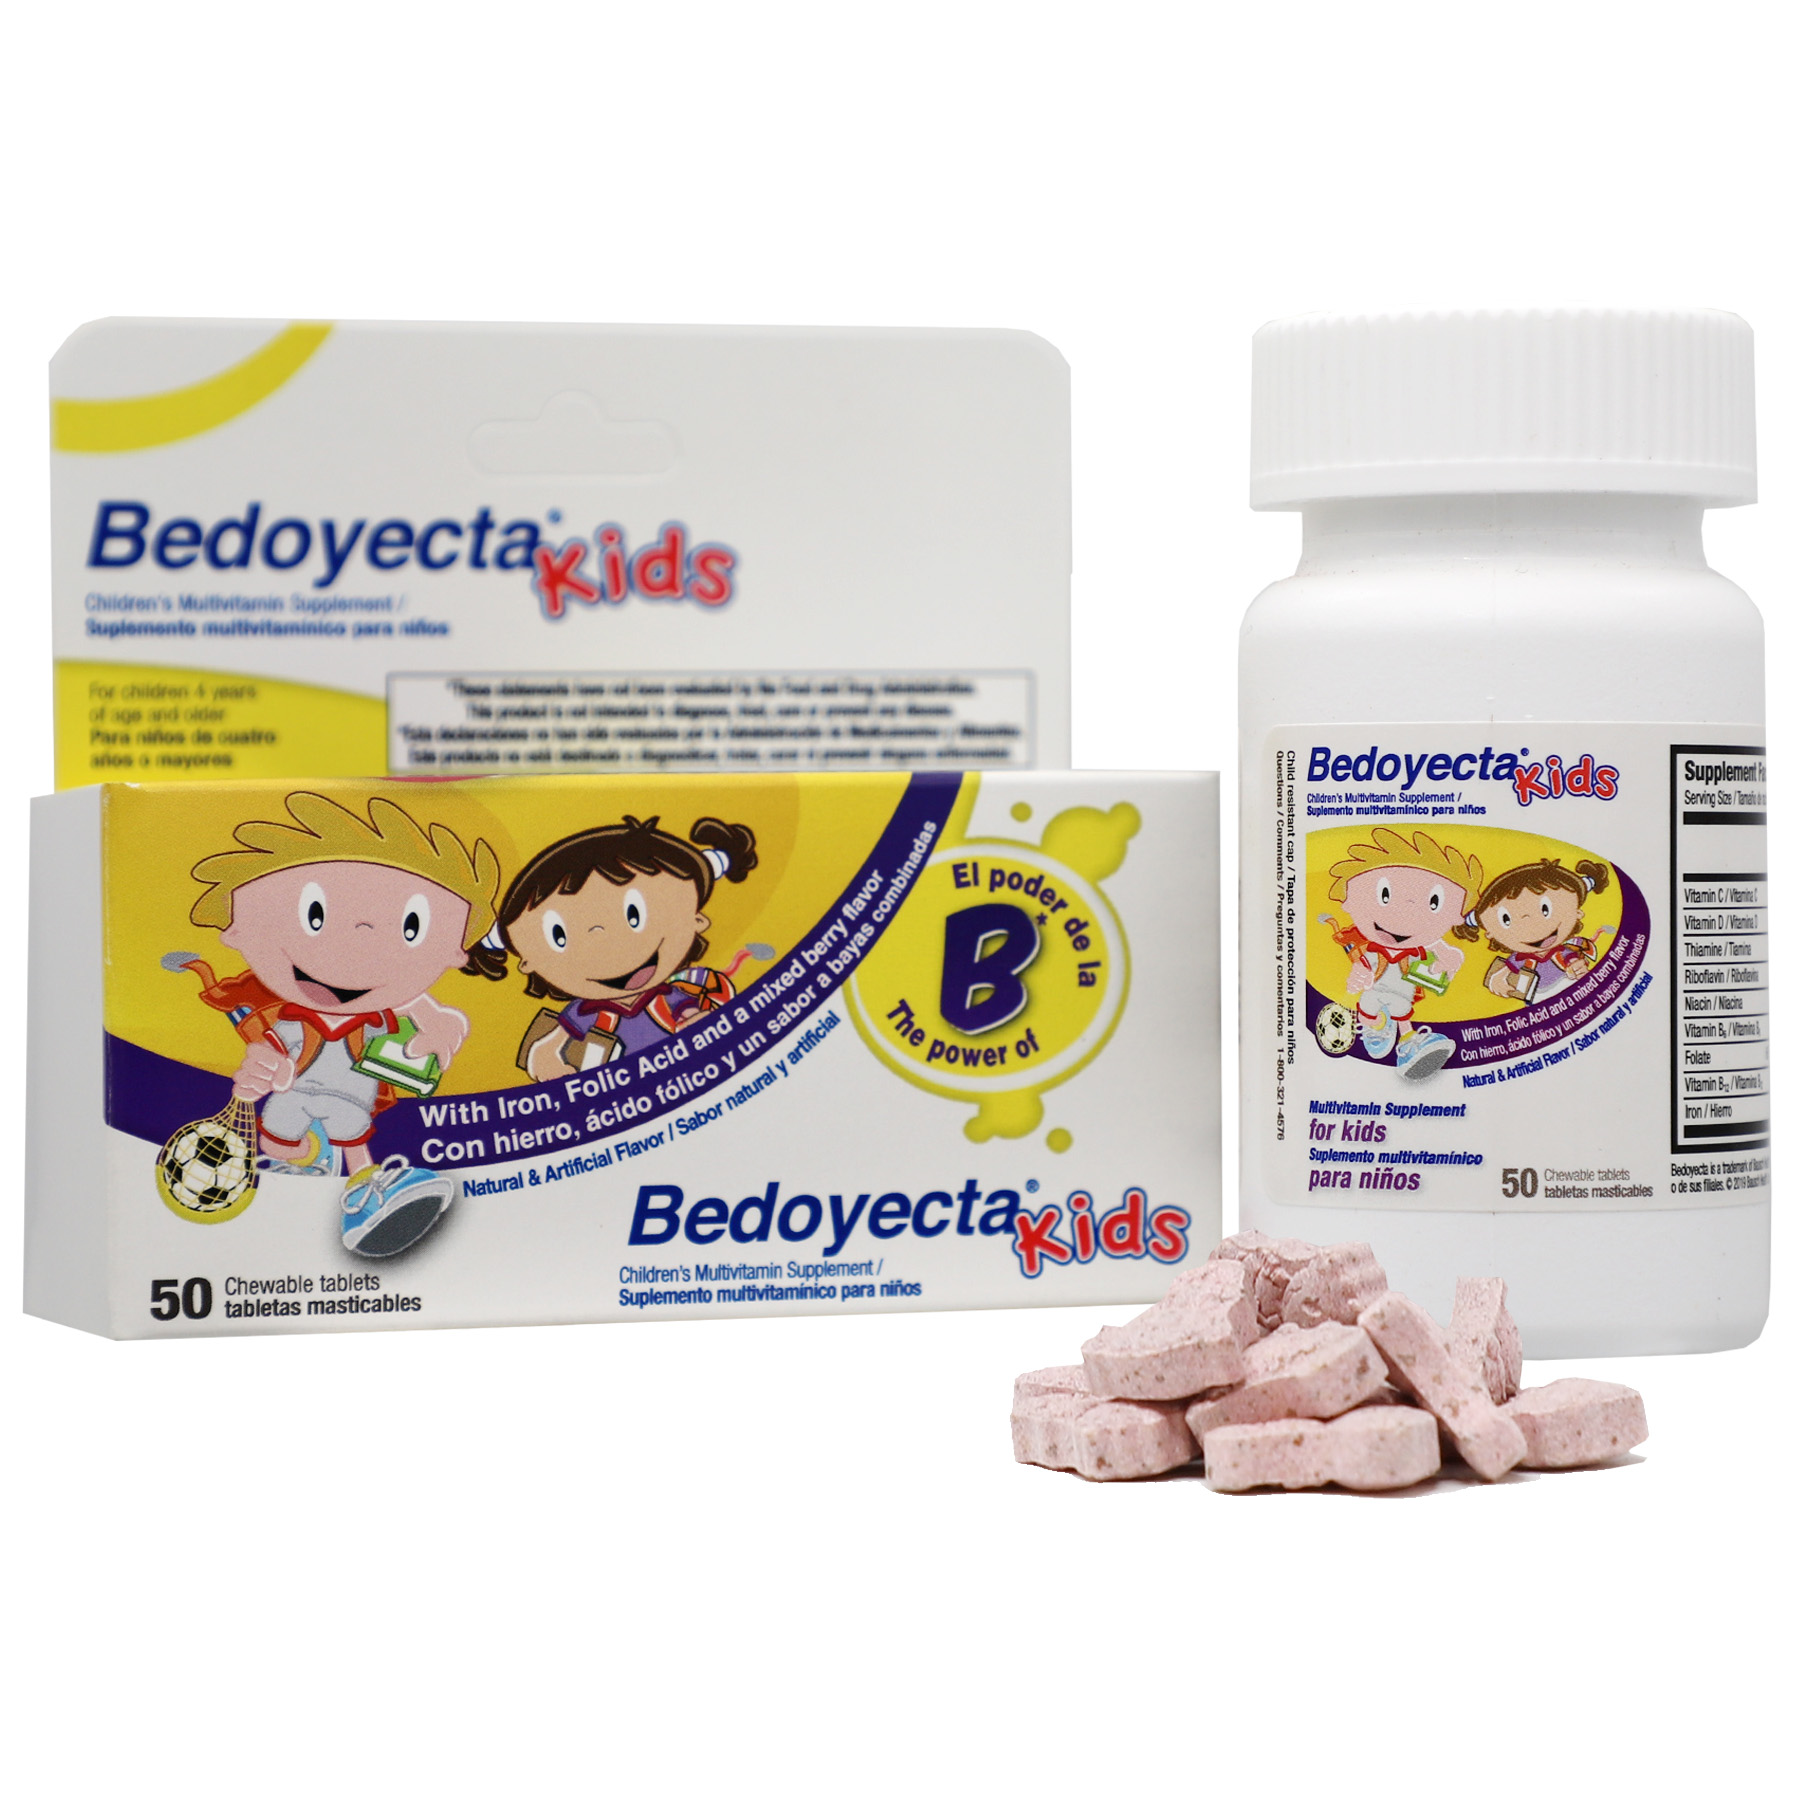 Bedoyecta Kids Dietary Supplement Tablets Unisex for Healthy Growth, 50 Count - image 1 of 5